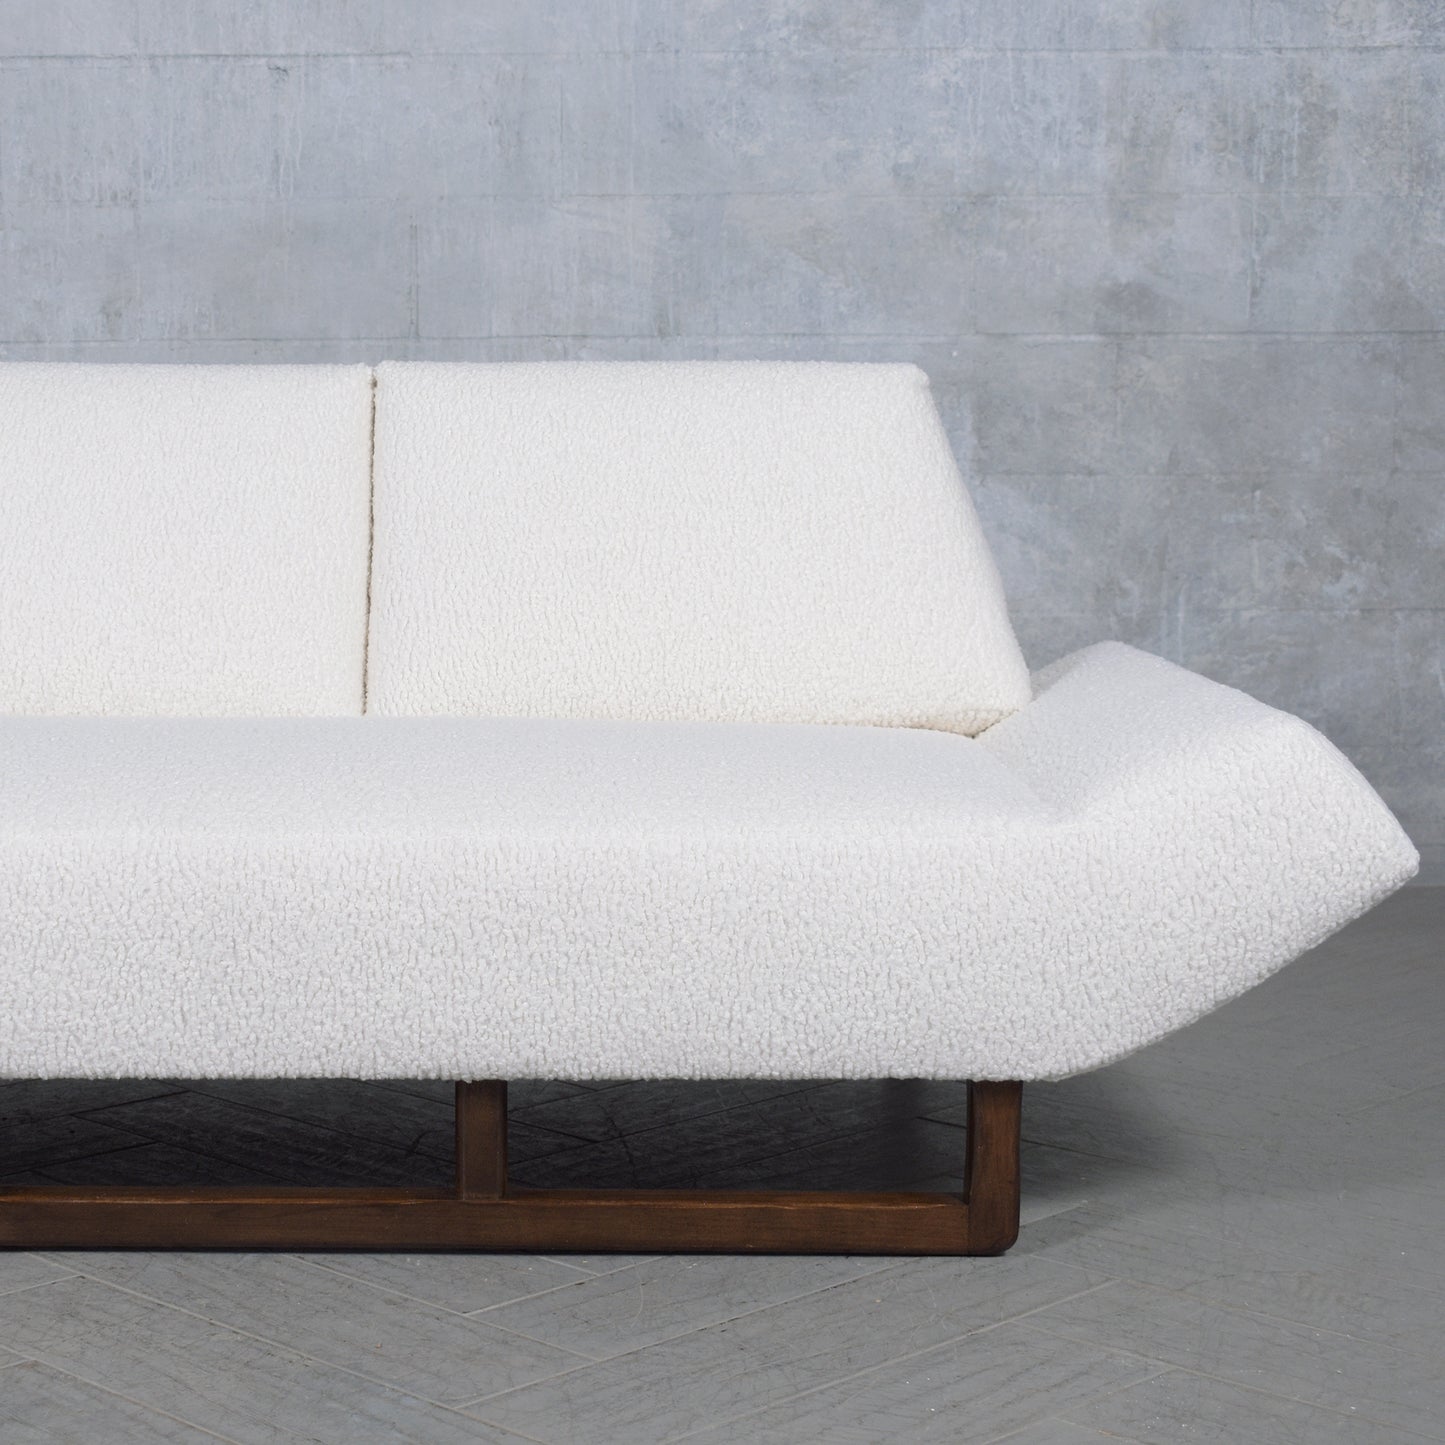 Restored Vintage 1960s Mid-Century Sofa with Geometric Design and Bouclé Fabric